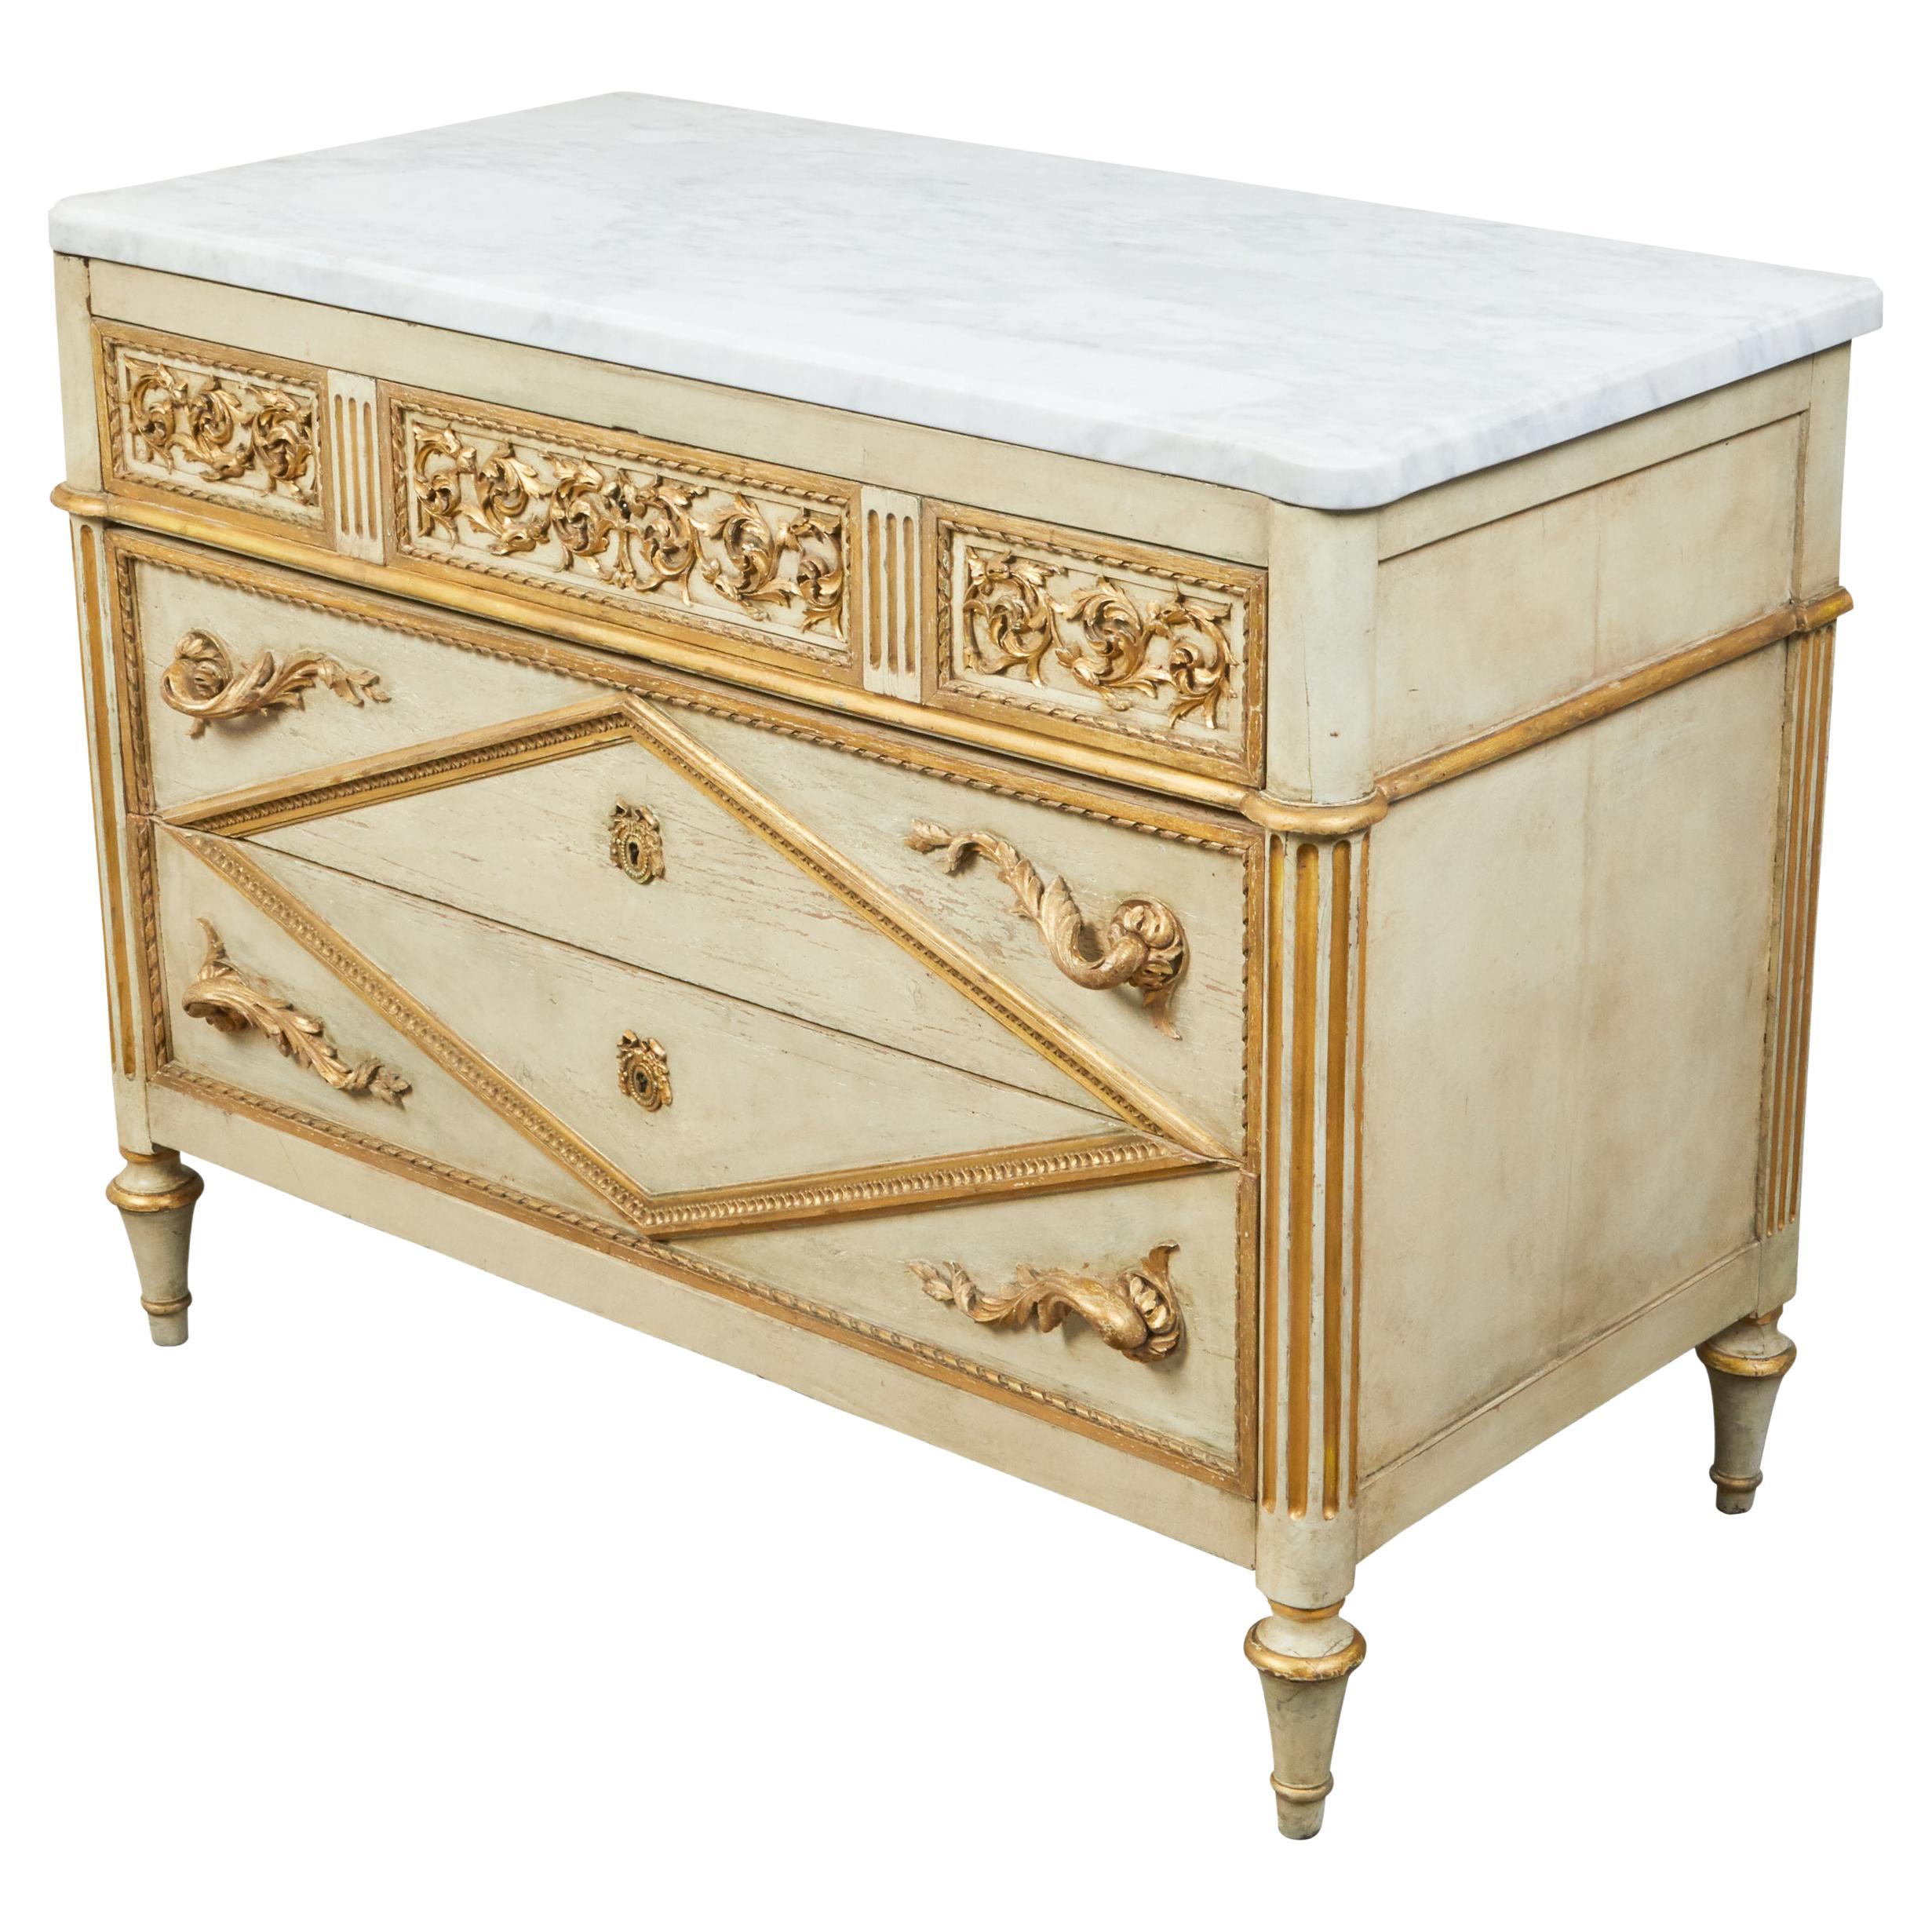 Italian Neoclassical 1800s Three-Drawer Commode with Gilt and Carved Motifs